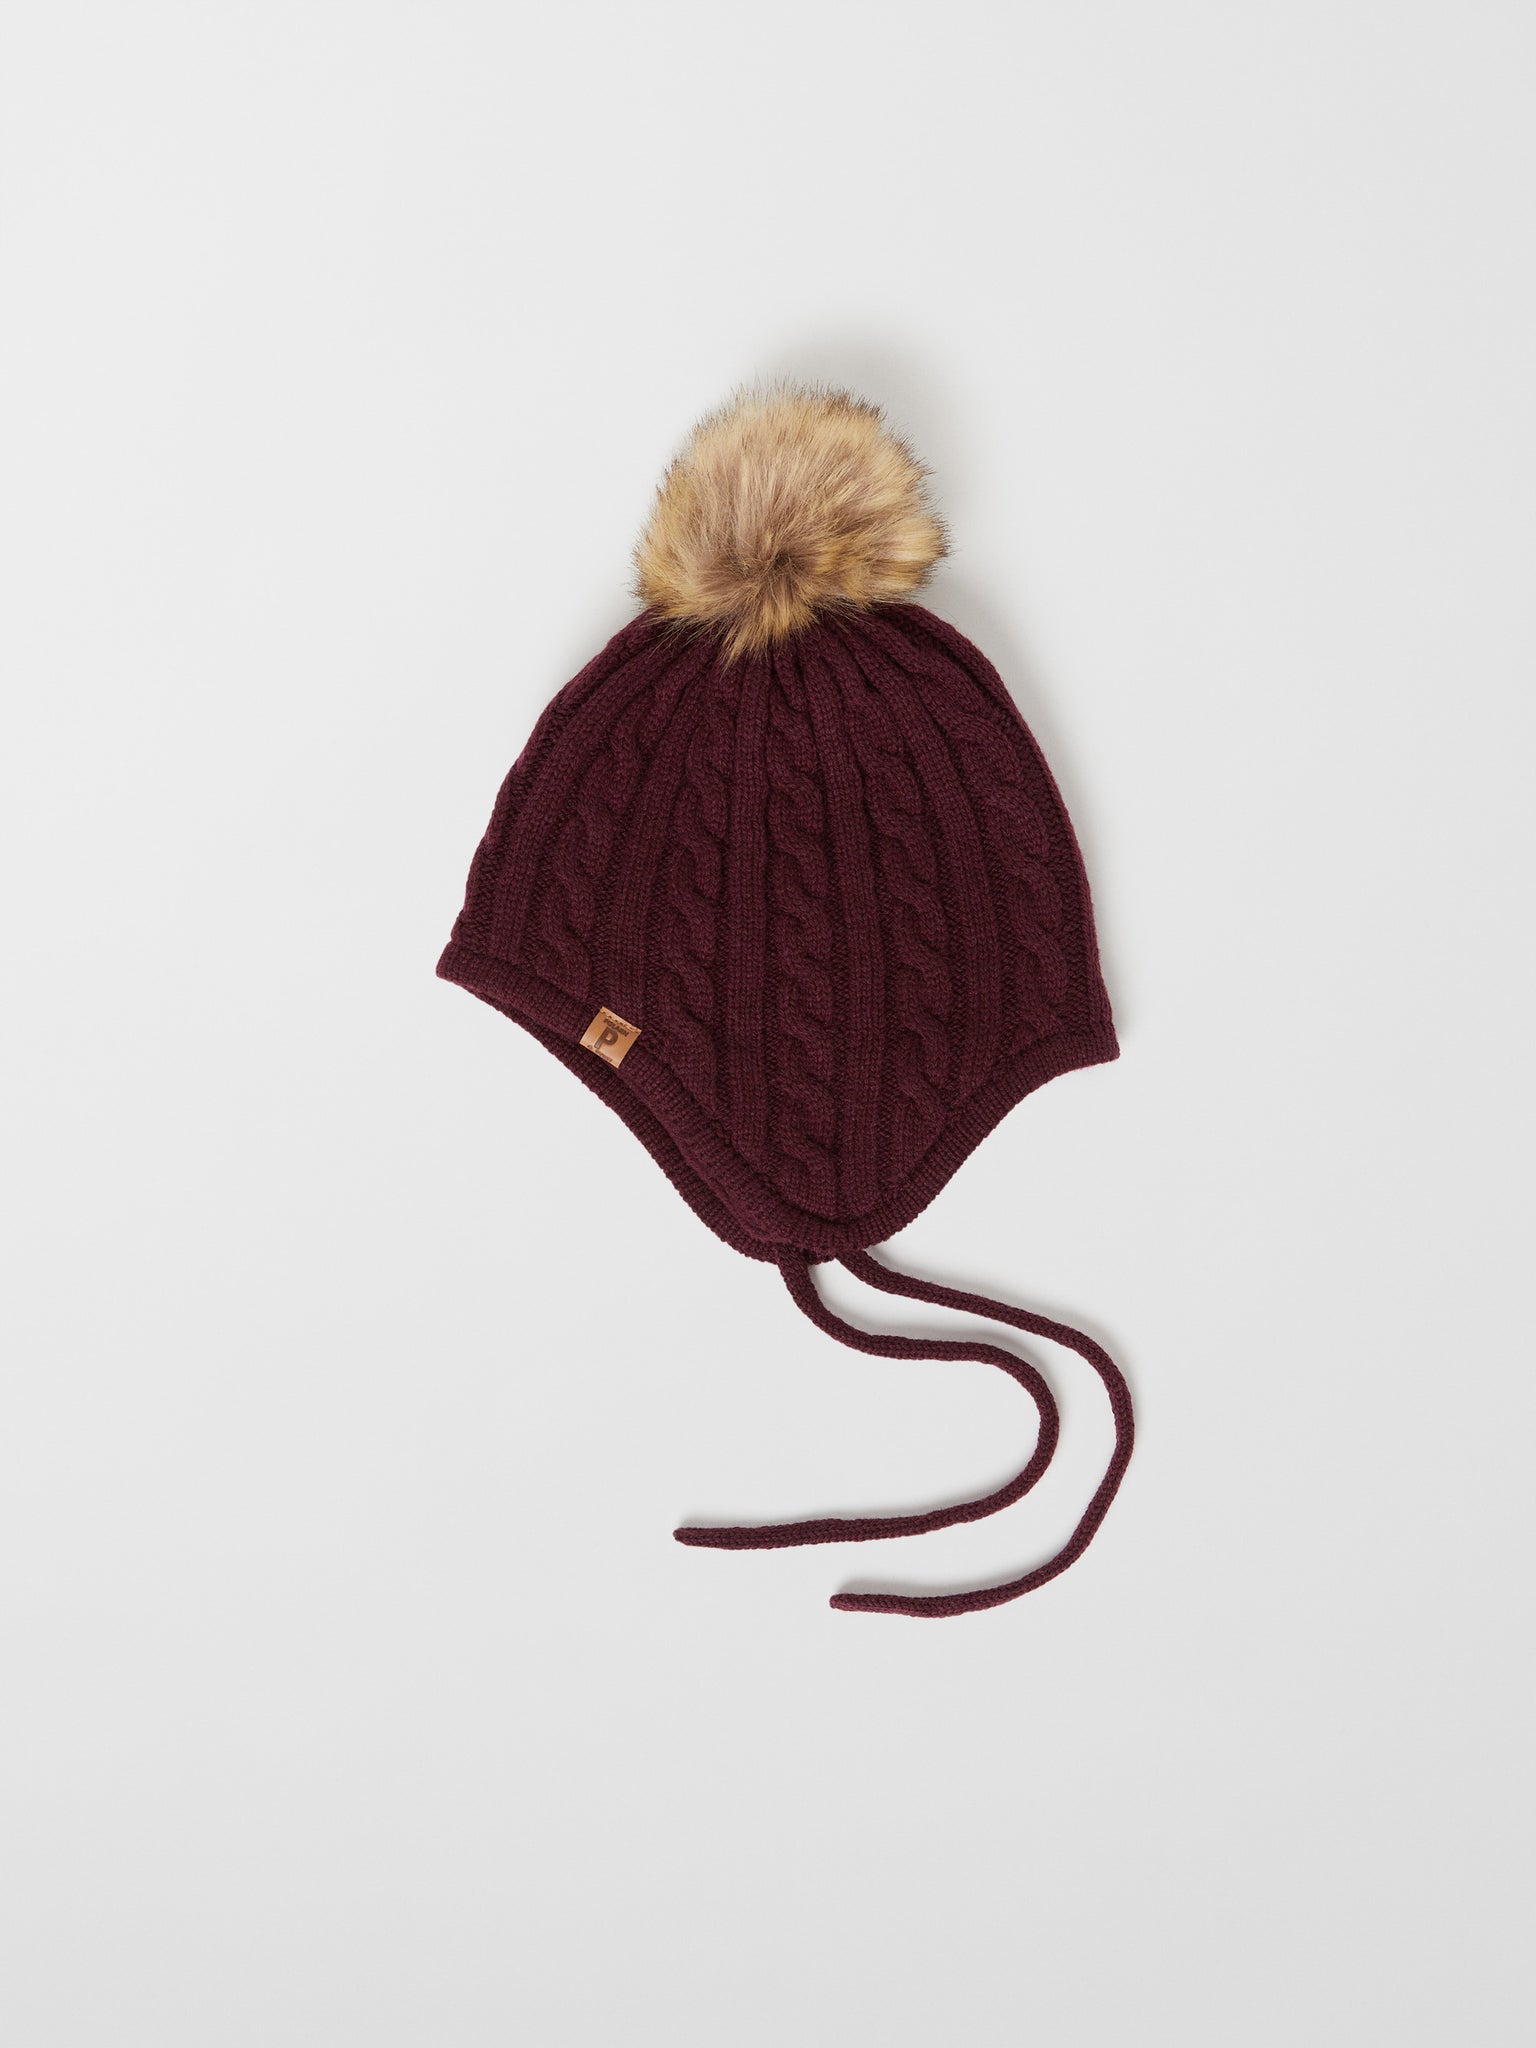 Burgundy Kids Wool Bobble Hat from the Polarn O. Pyret outerwear collection. Quality kids clothing made to last.